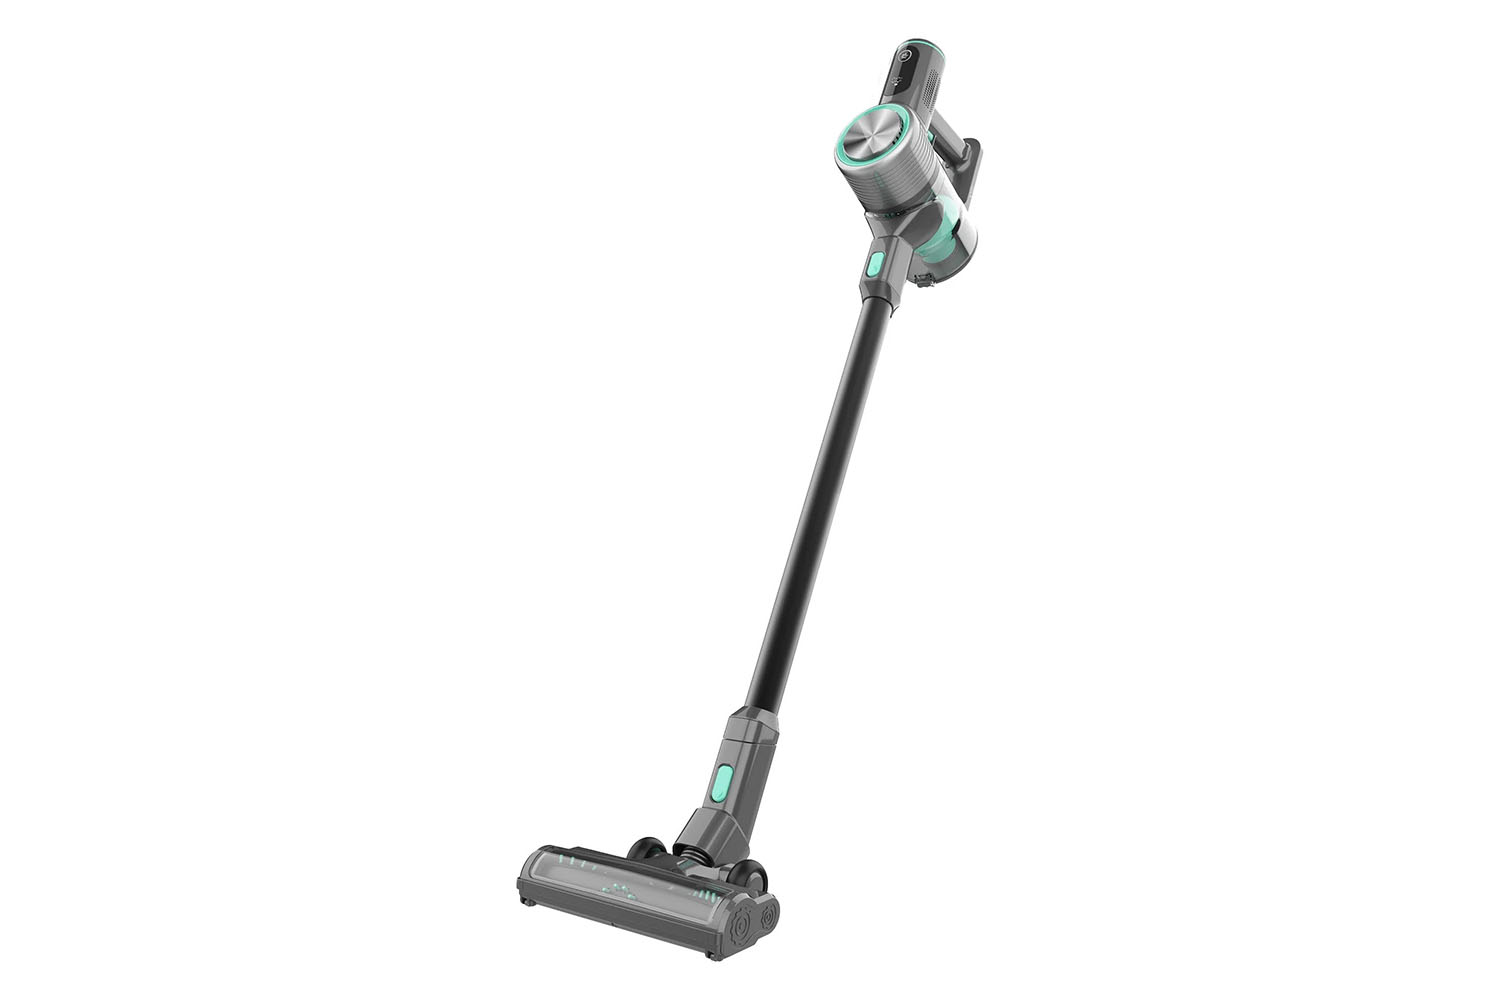 The Wyze Cordless Stick Vacuum on a. white background.